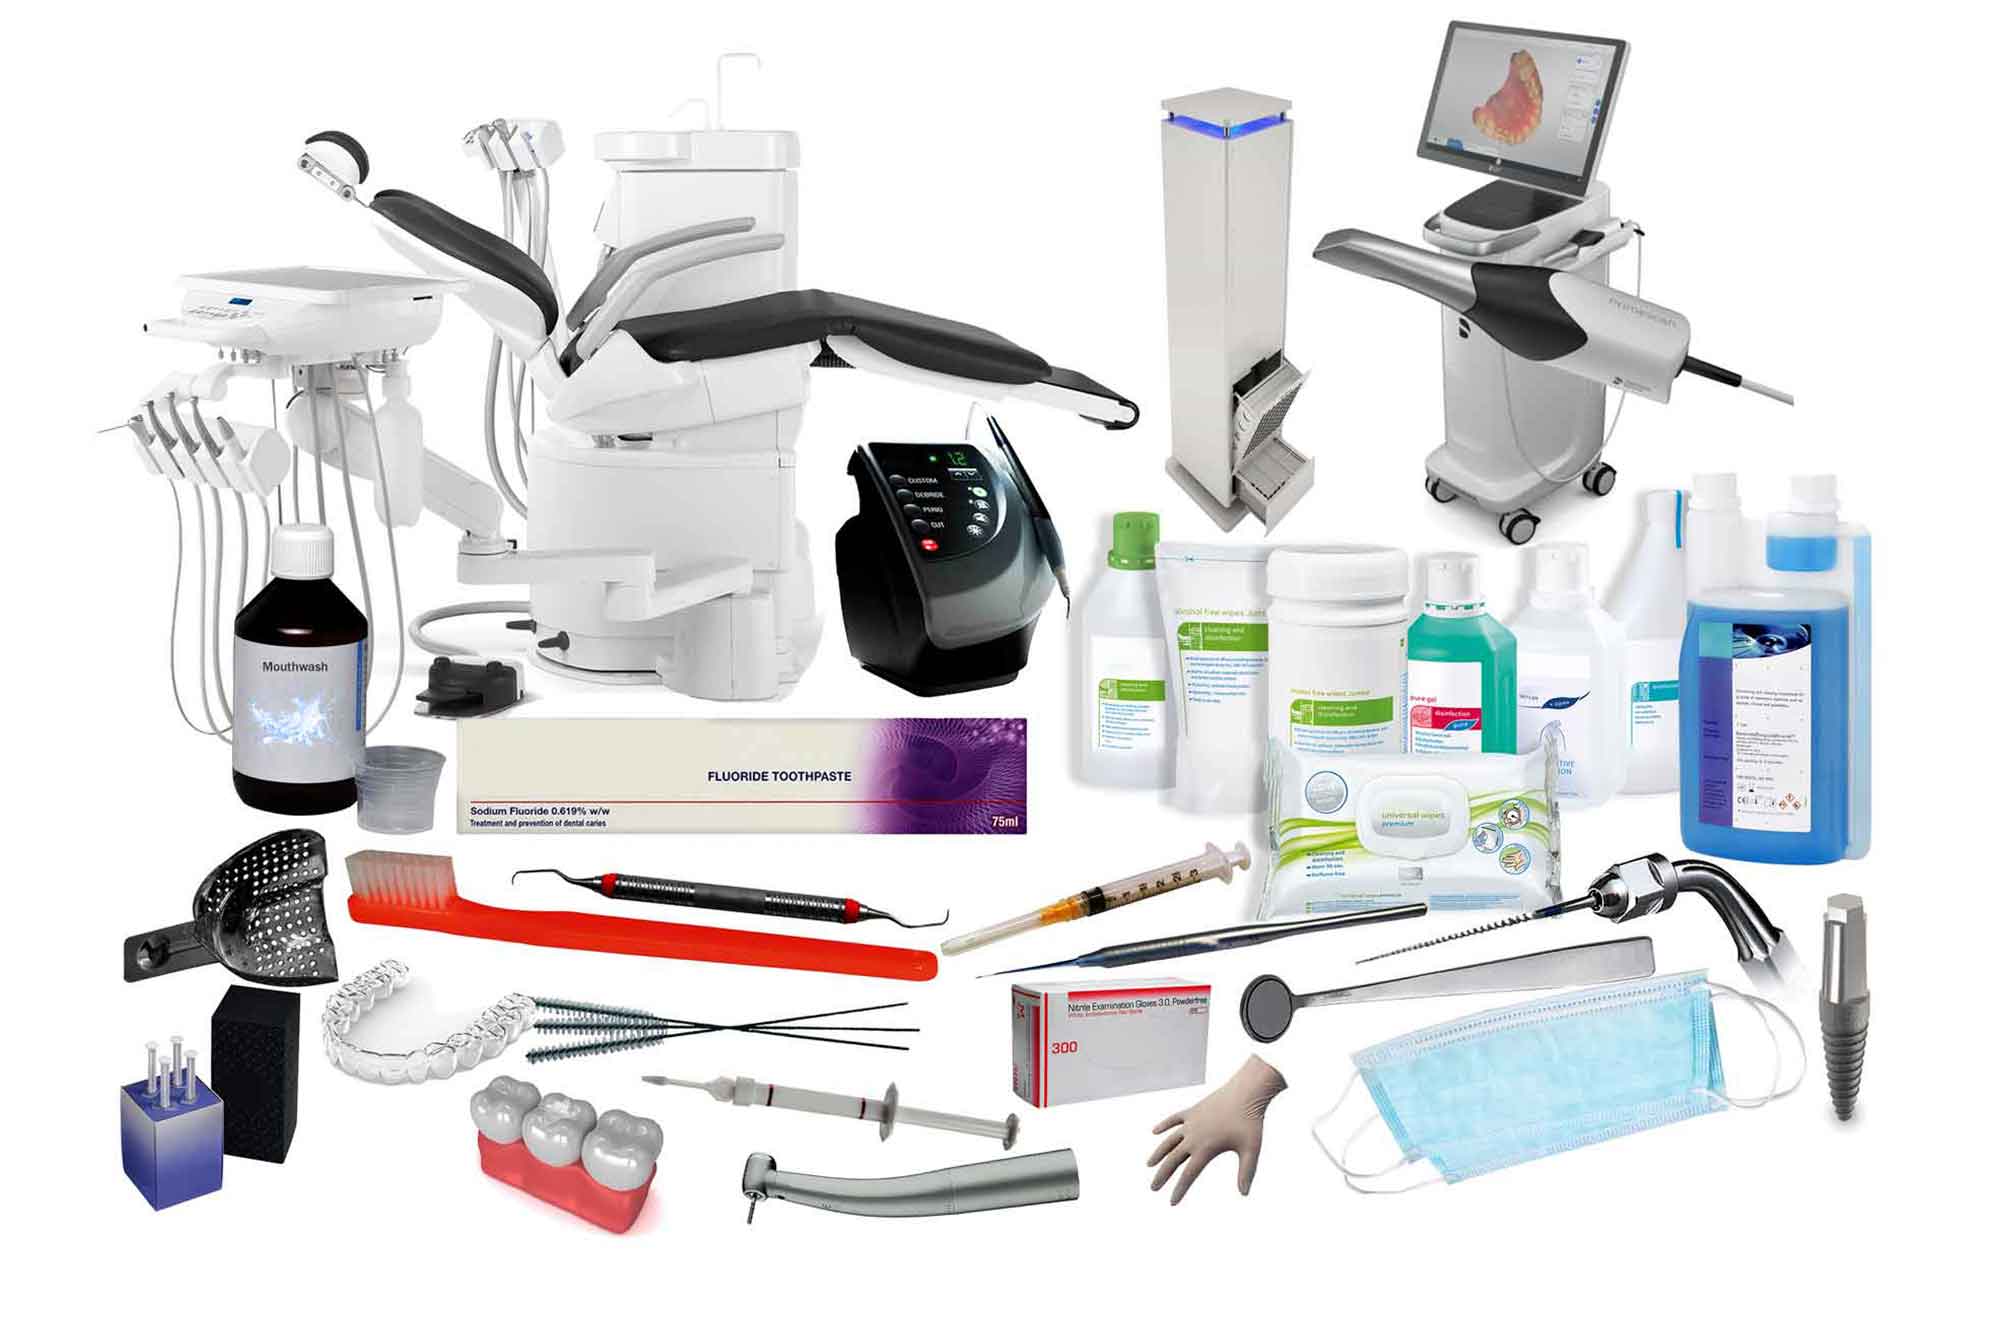 The Different Types of Dental Supplies and Equipment That Exist Today